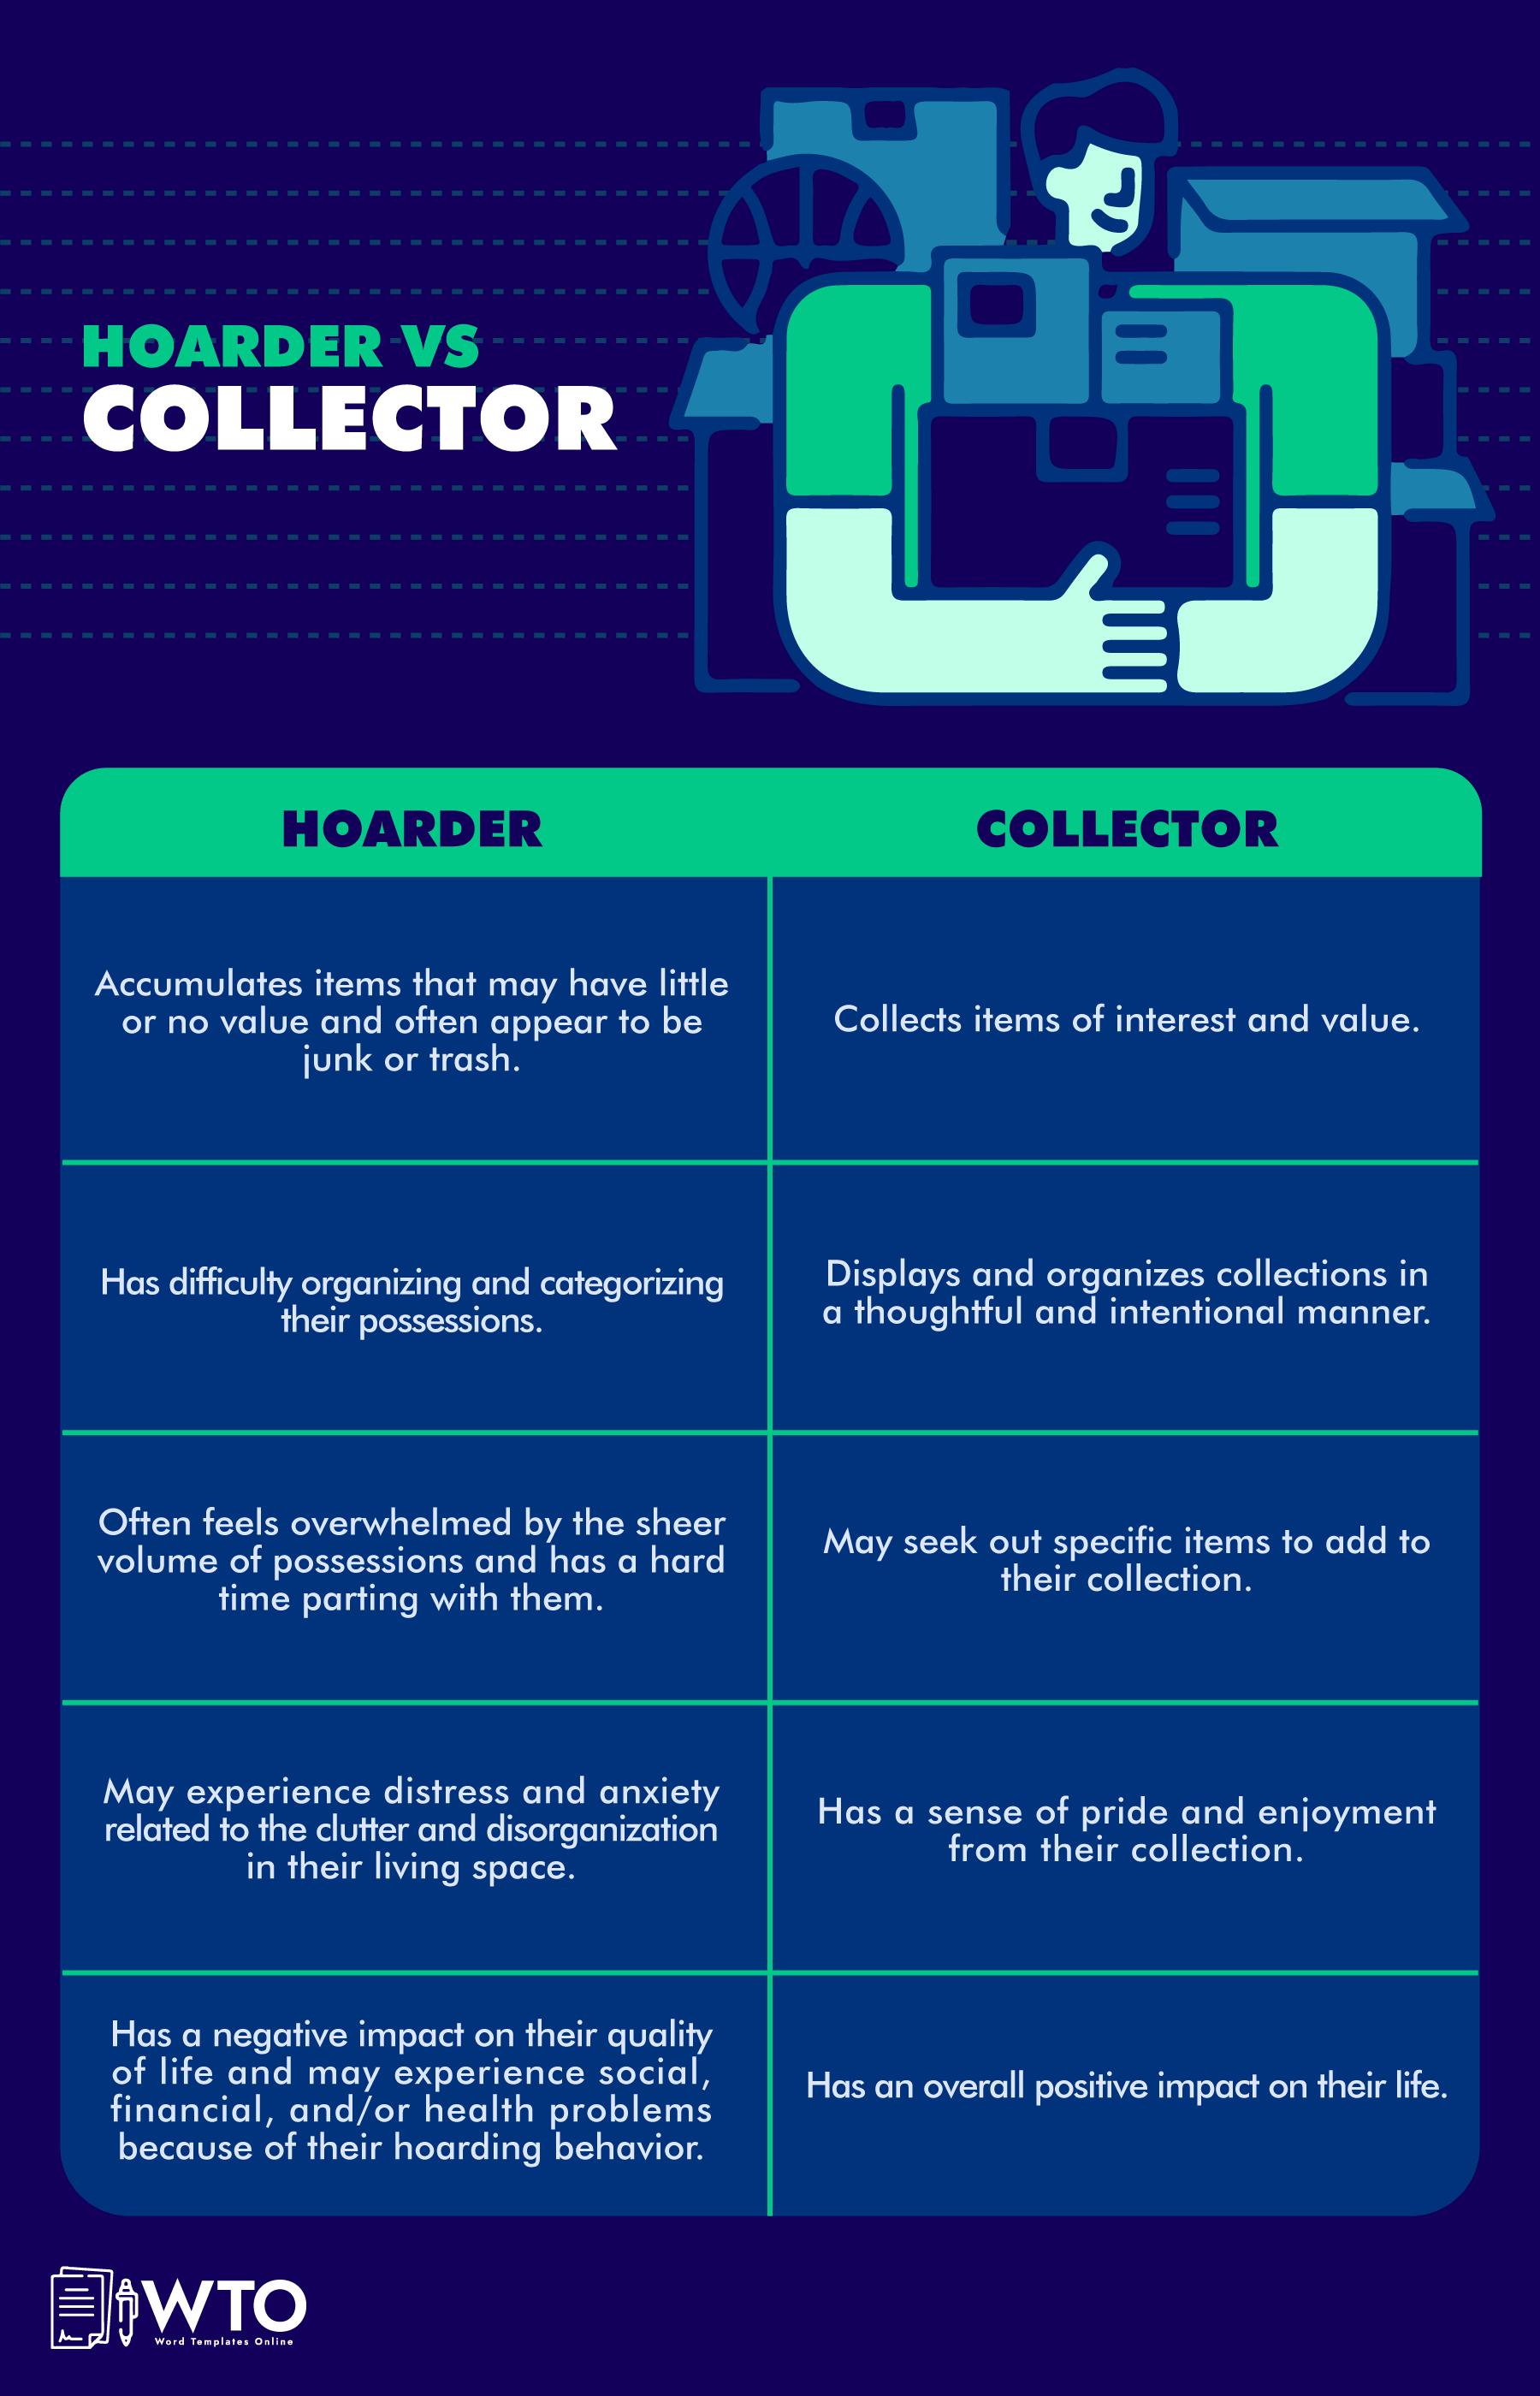 This infographic is about differences between hoarder and collector.